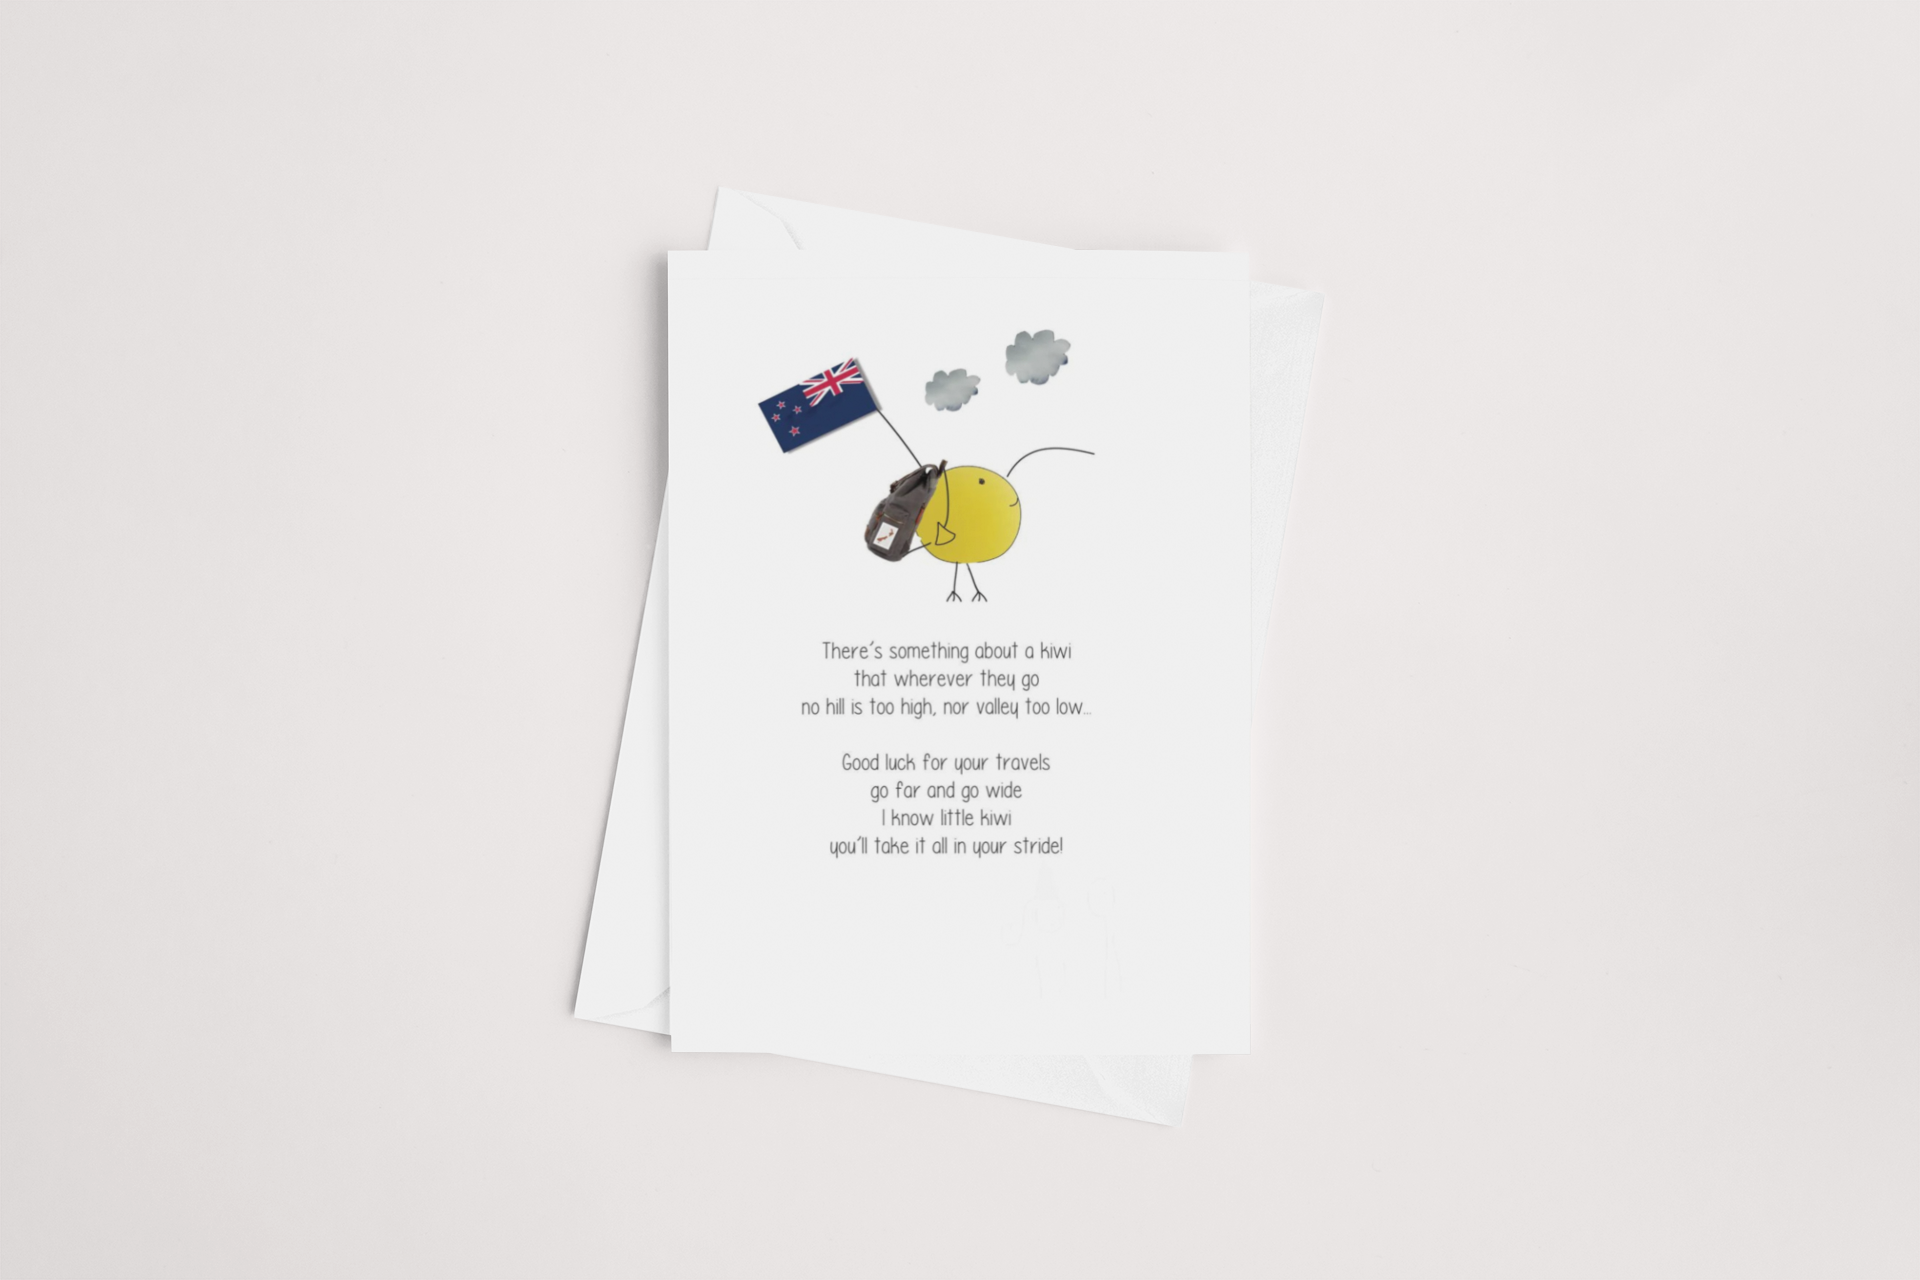 A whimsical greeting card, the Kiwi OE Travel Card by icandy, featuring an illustrated kiwi bird with a speech bubble, humorously dressed as a rugby player against a white background, complete with a small